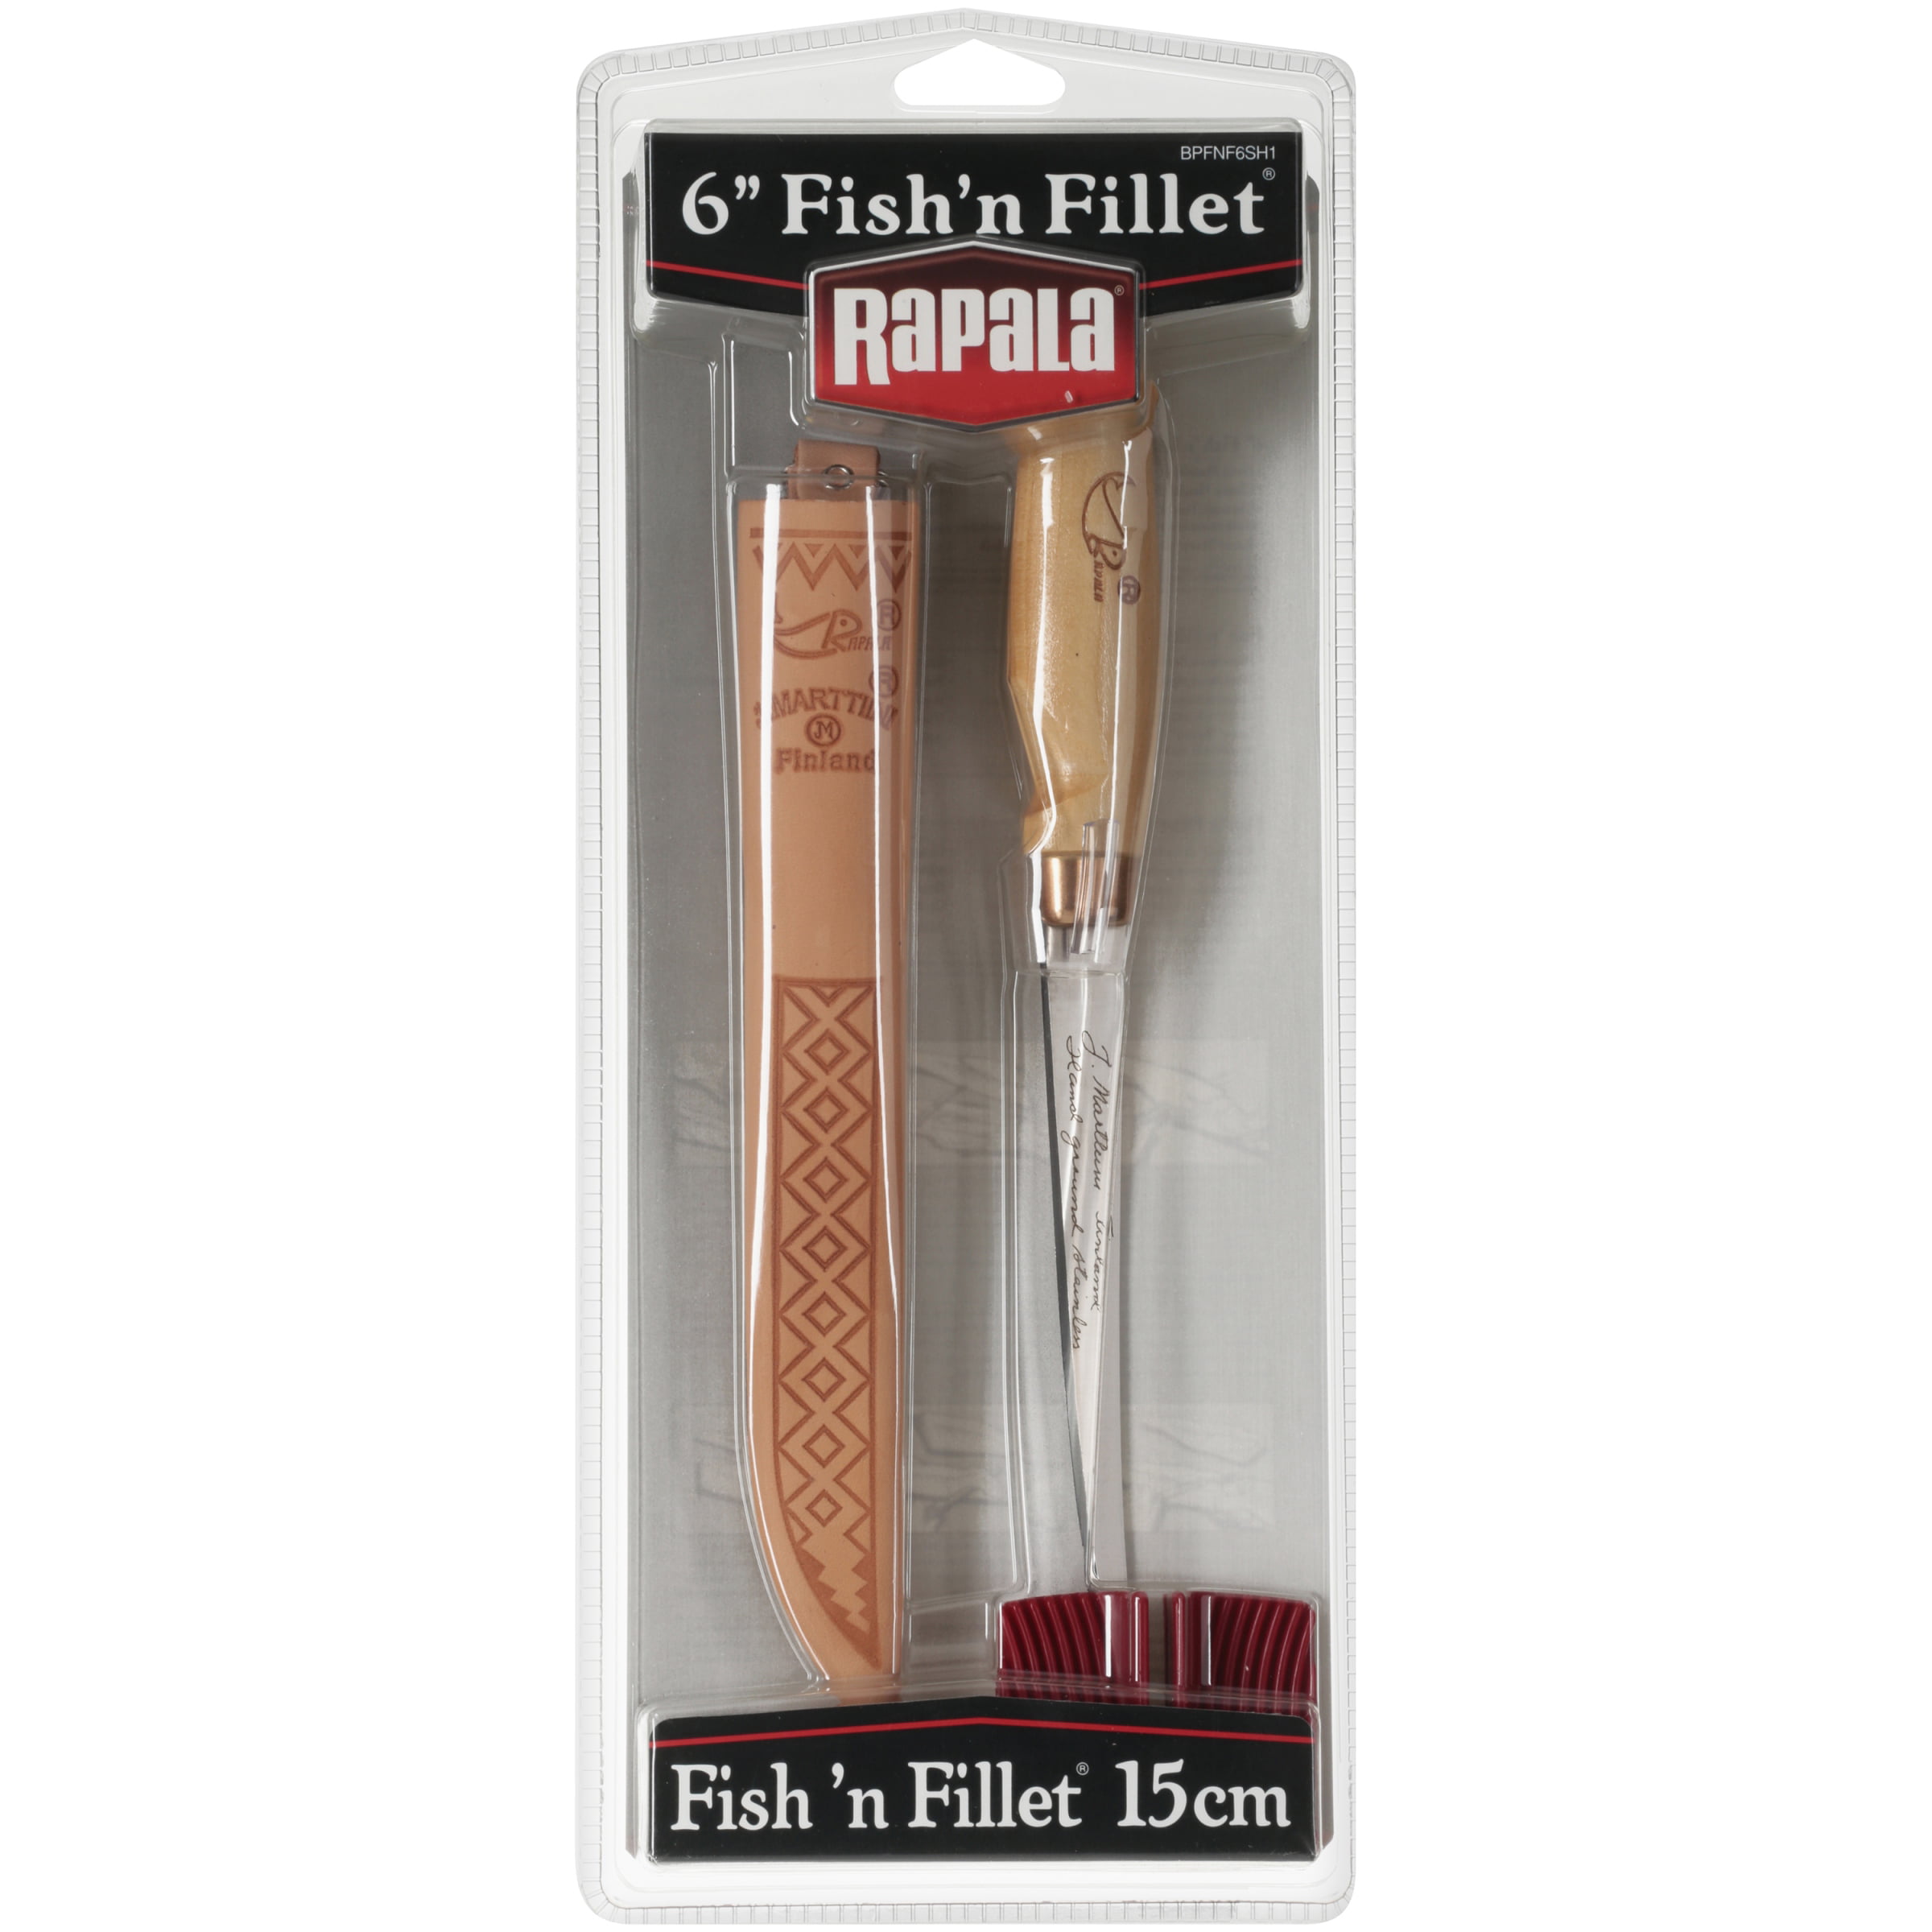 Rapala Fish 'n' Fillet Stainless Steel Knife, 4-in